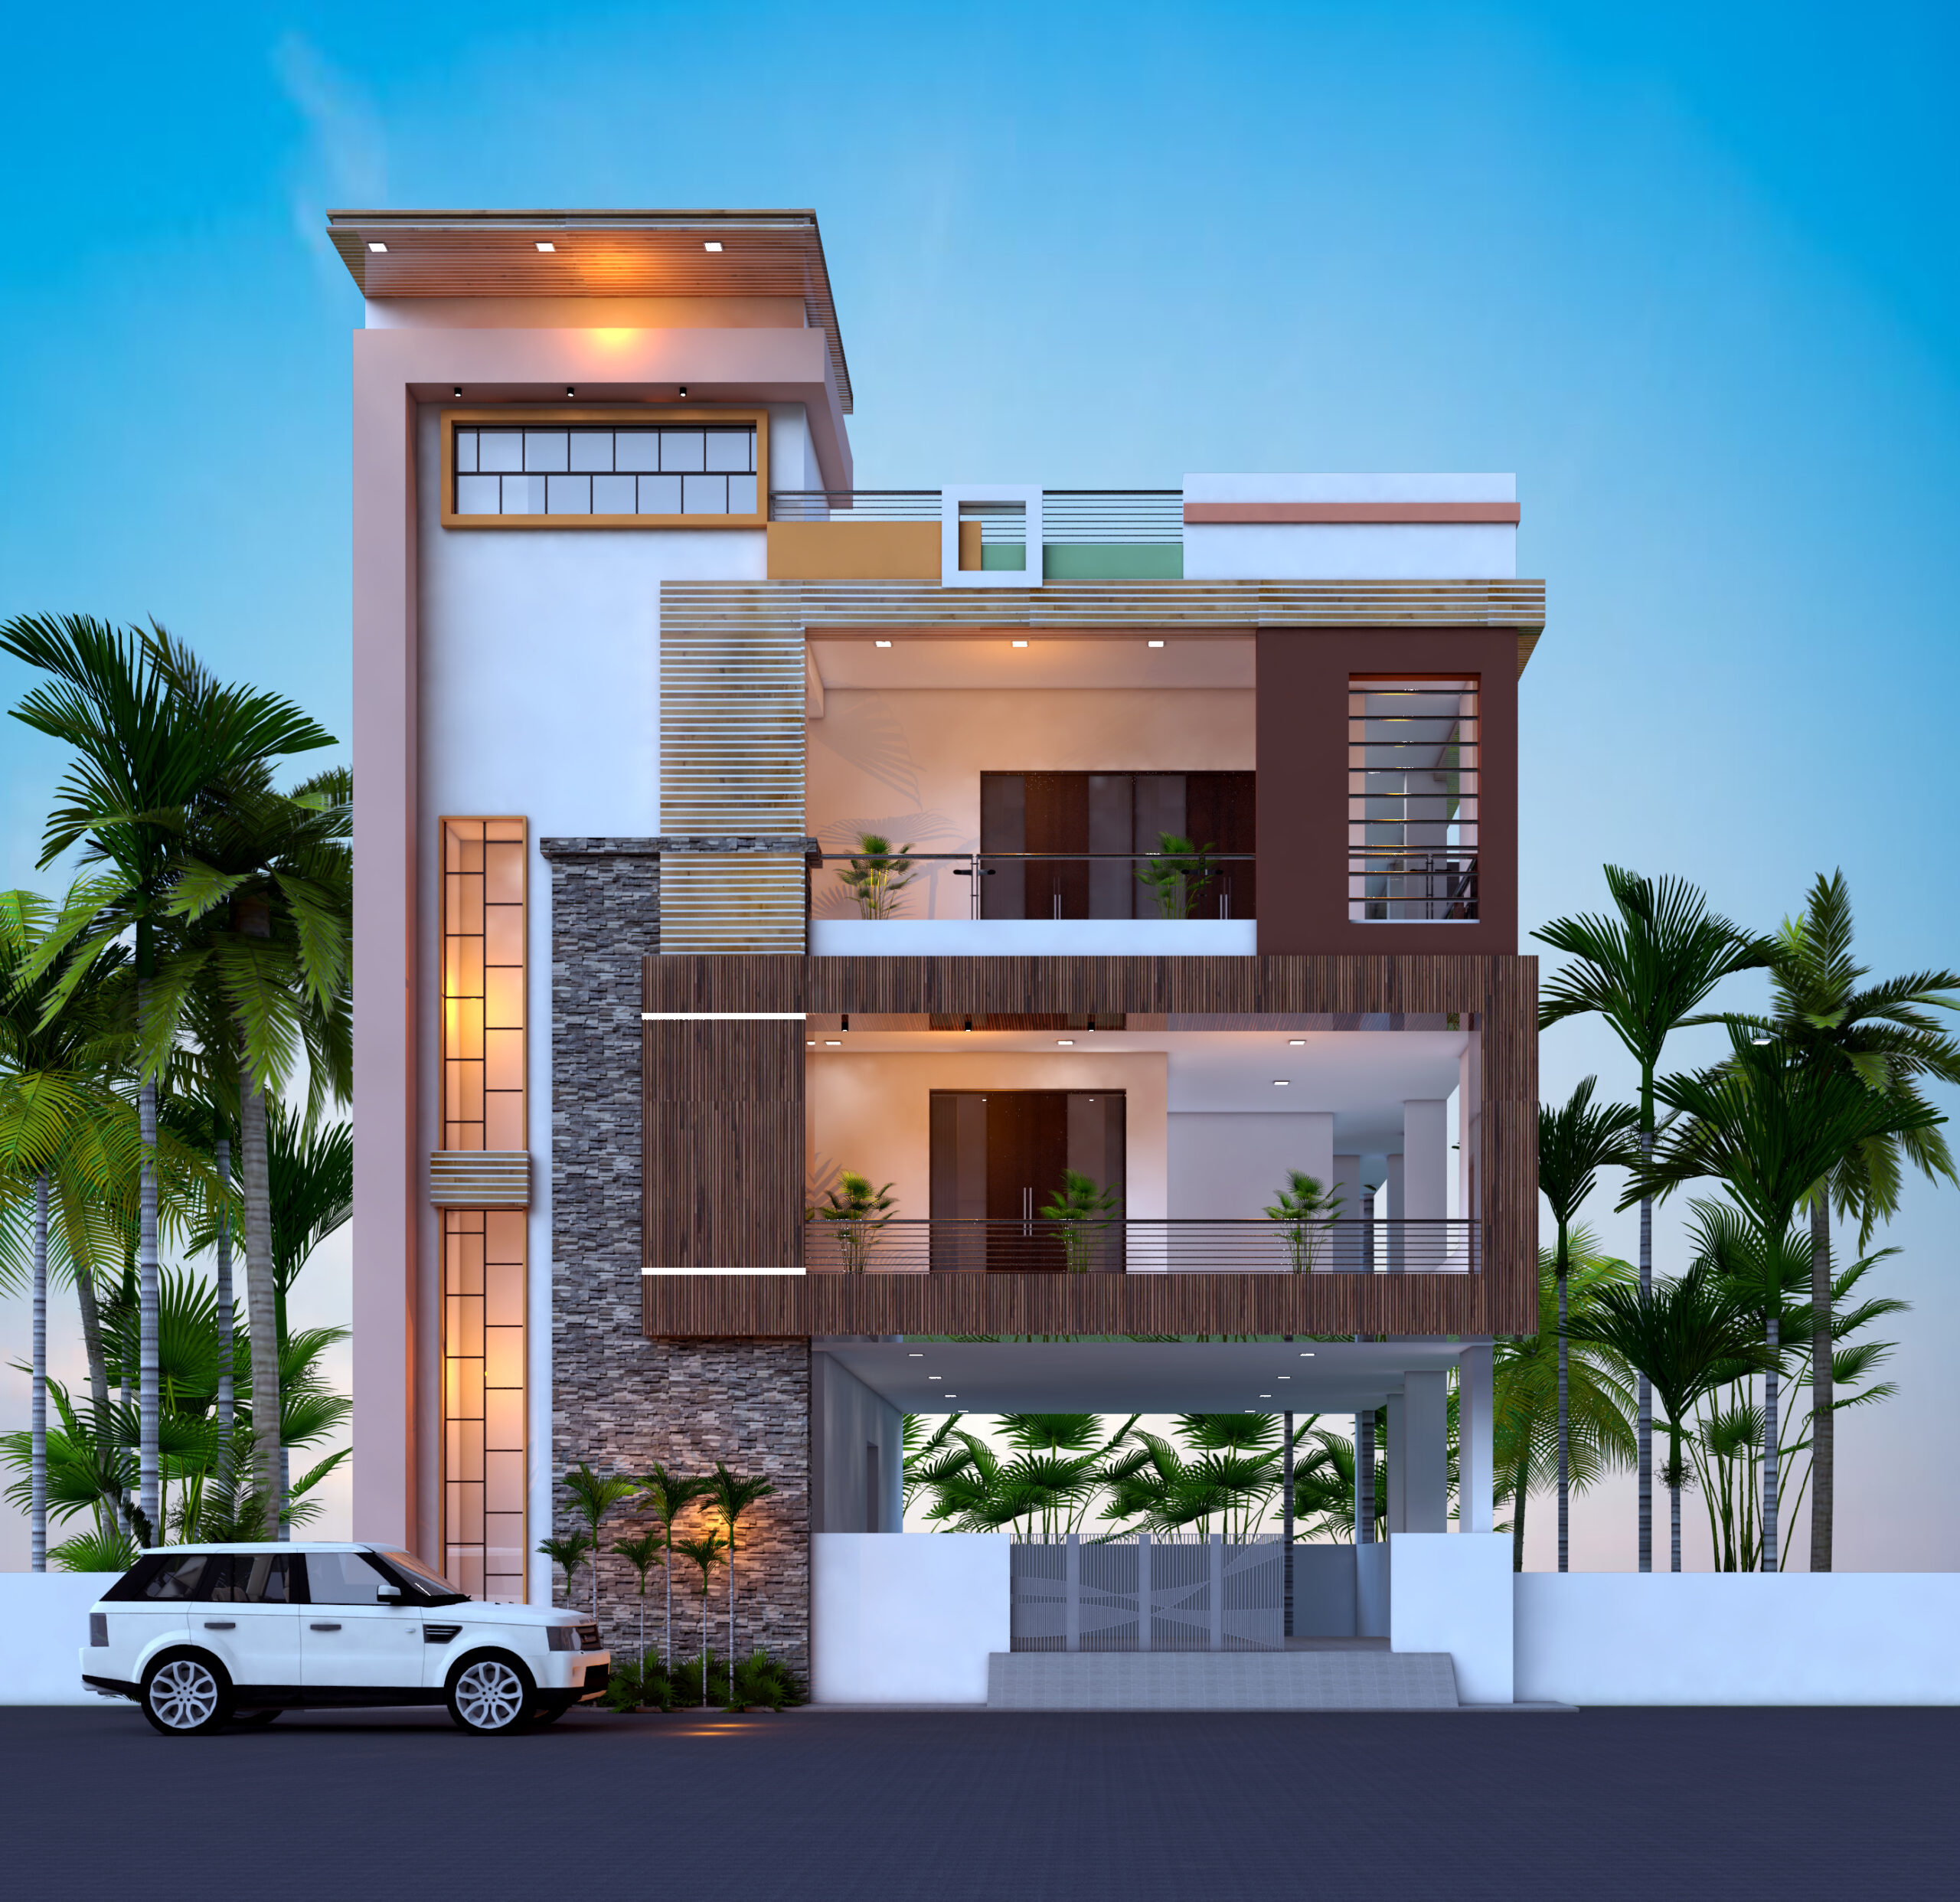 2 Bhk Plan With Front Elevation